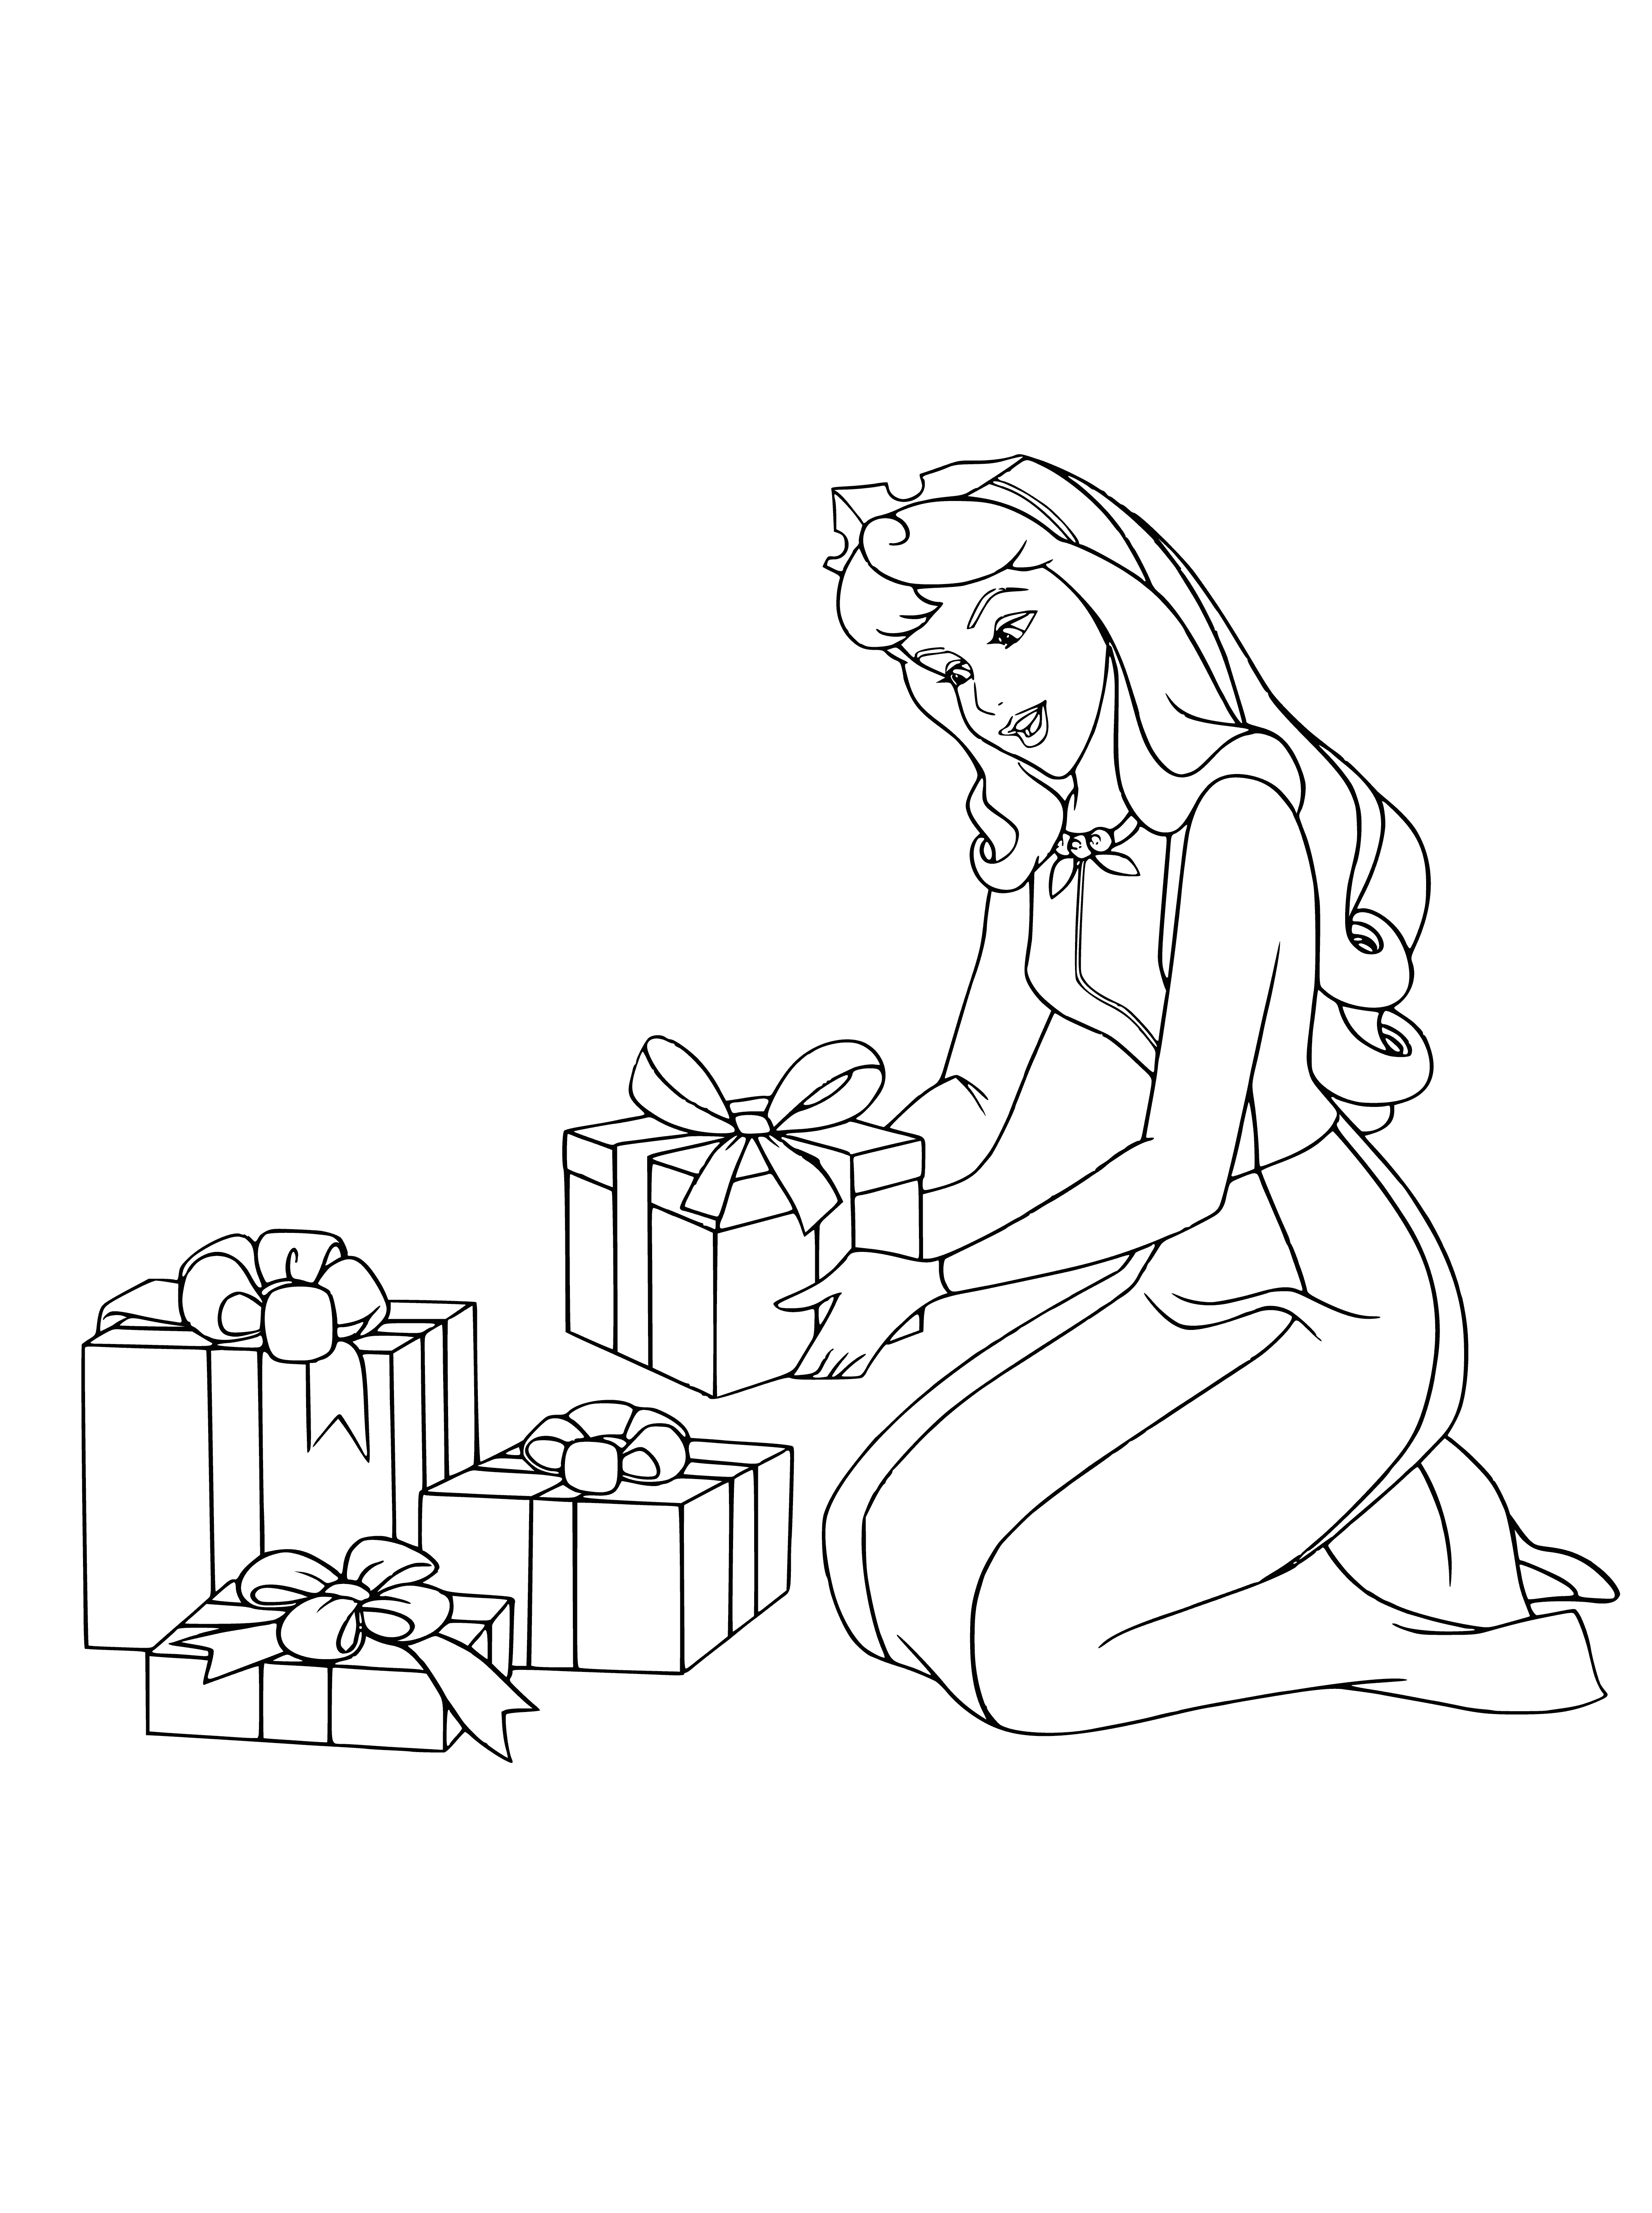 Aurora with gifts coloring page